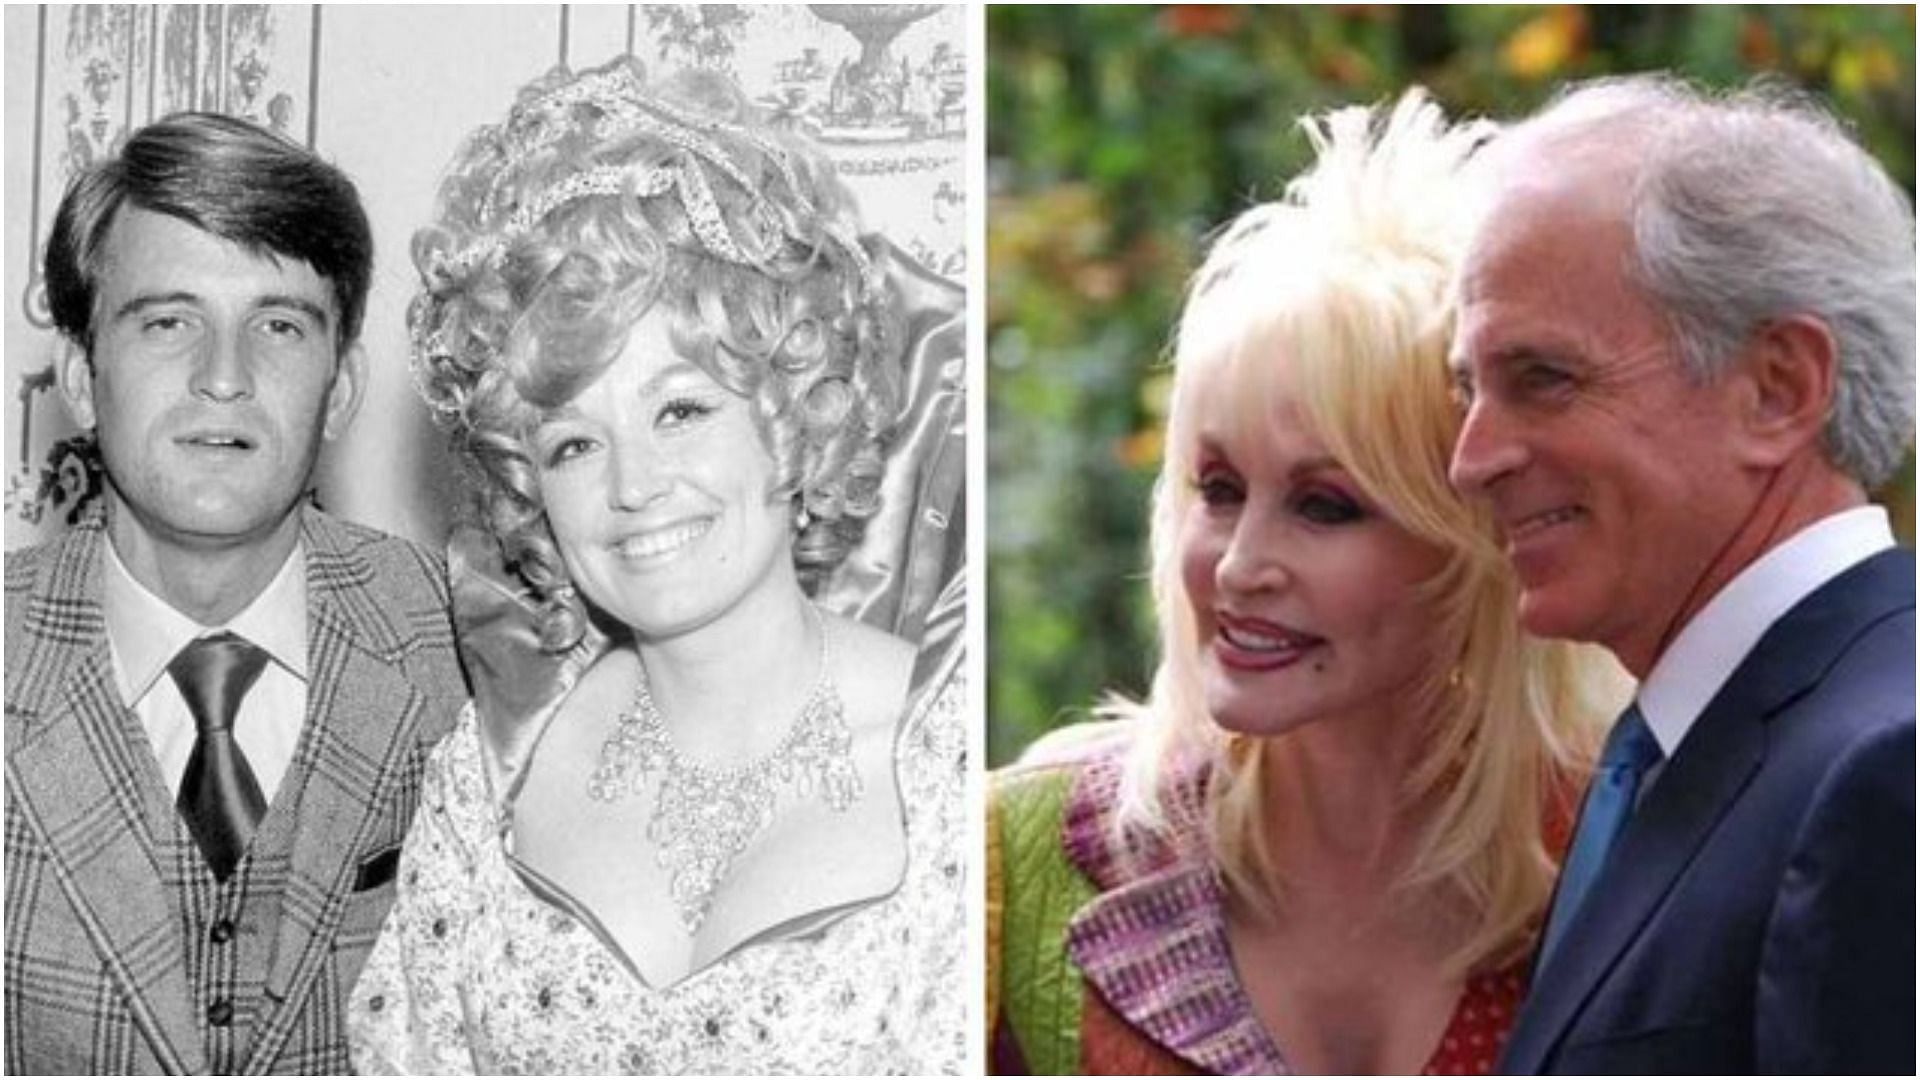 Dolly Parton and Carl Dean have been married to each other for 57 years (Image via erinisaway/Twitter)